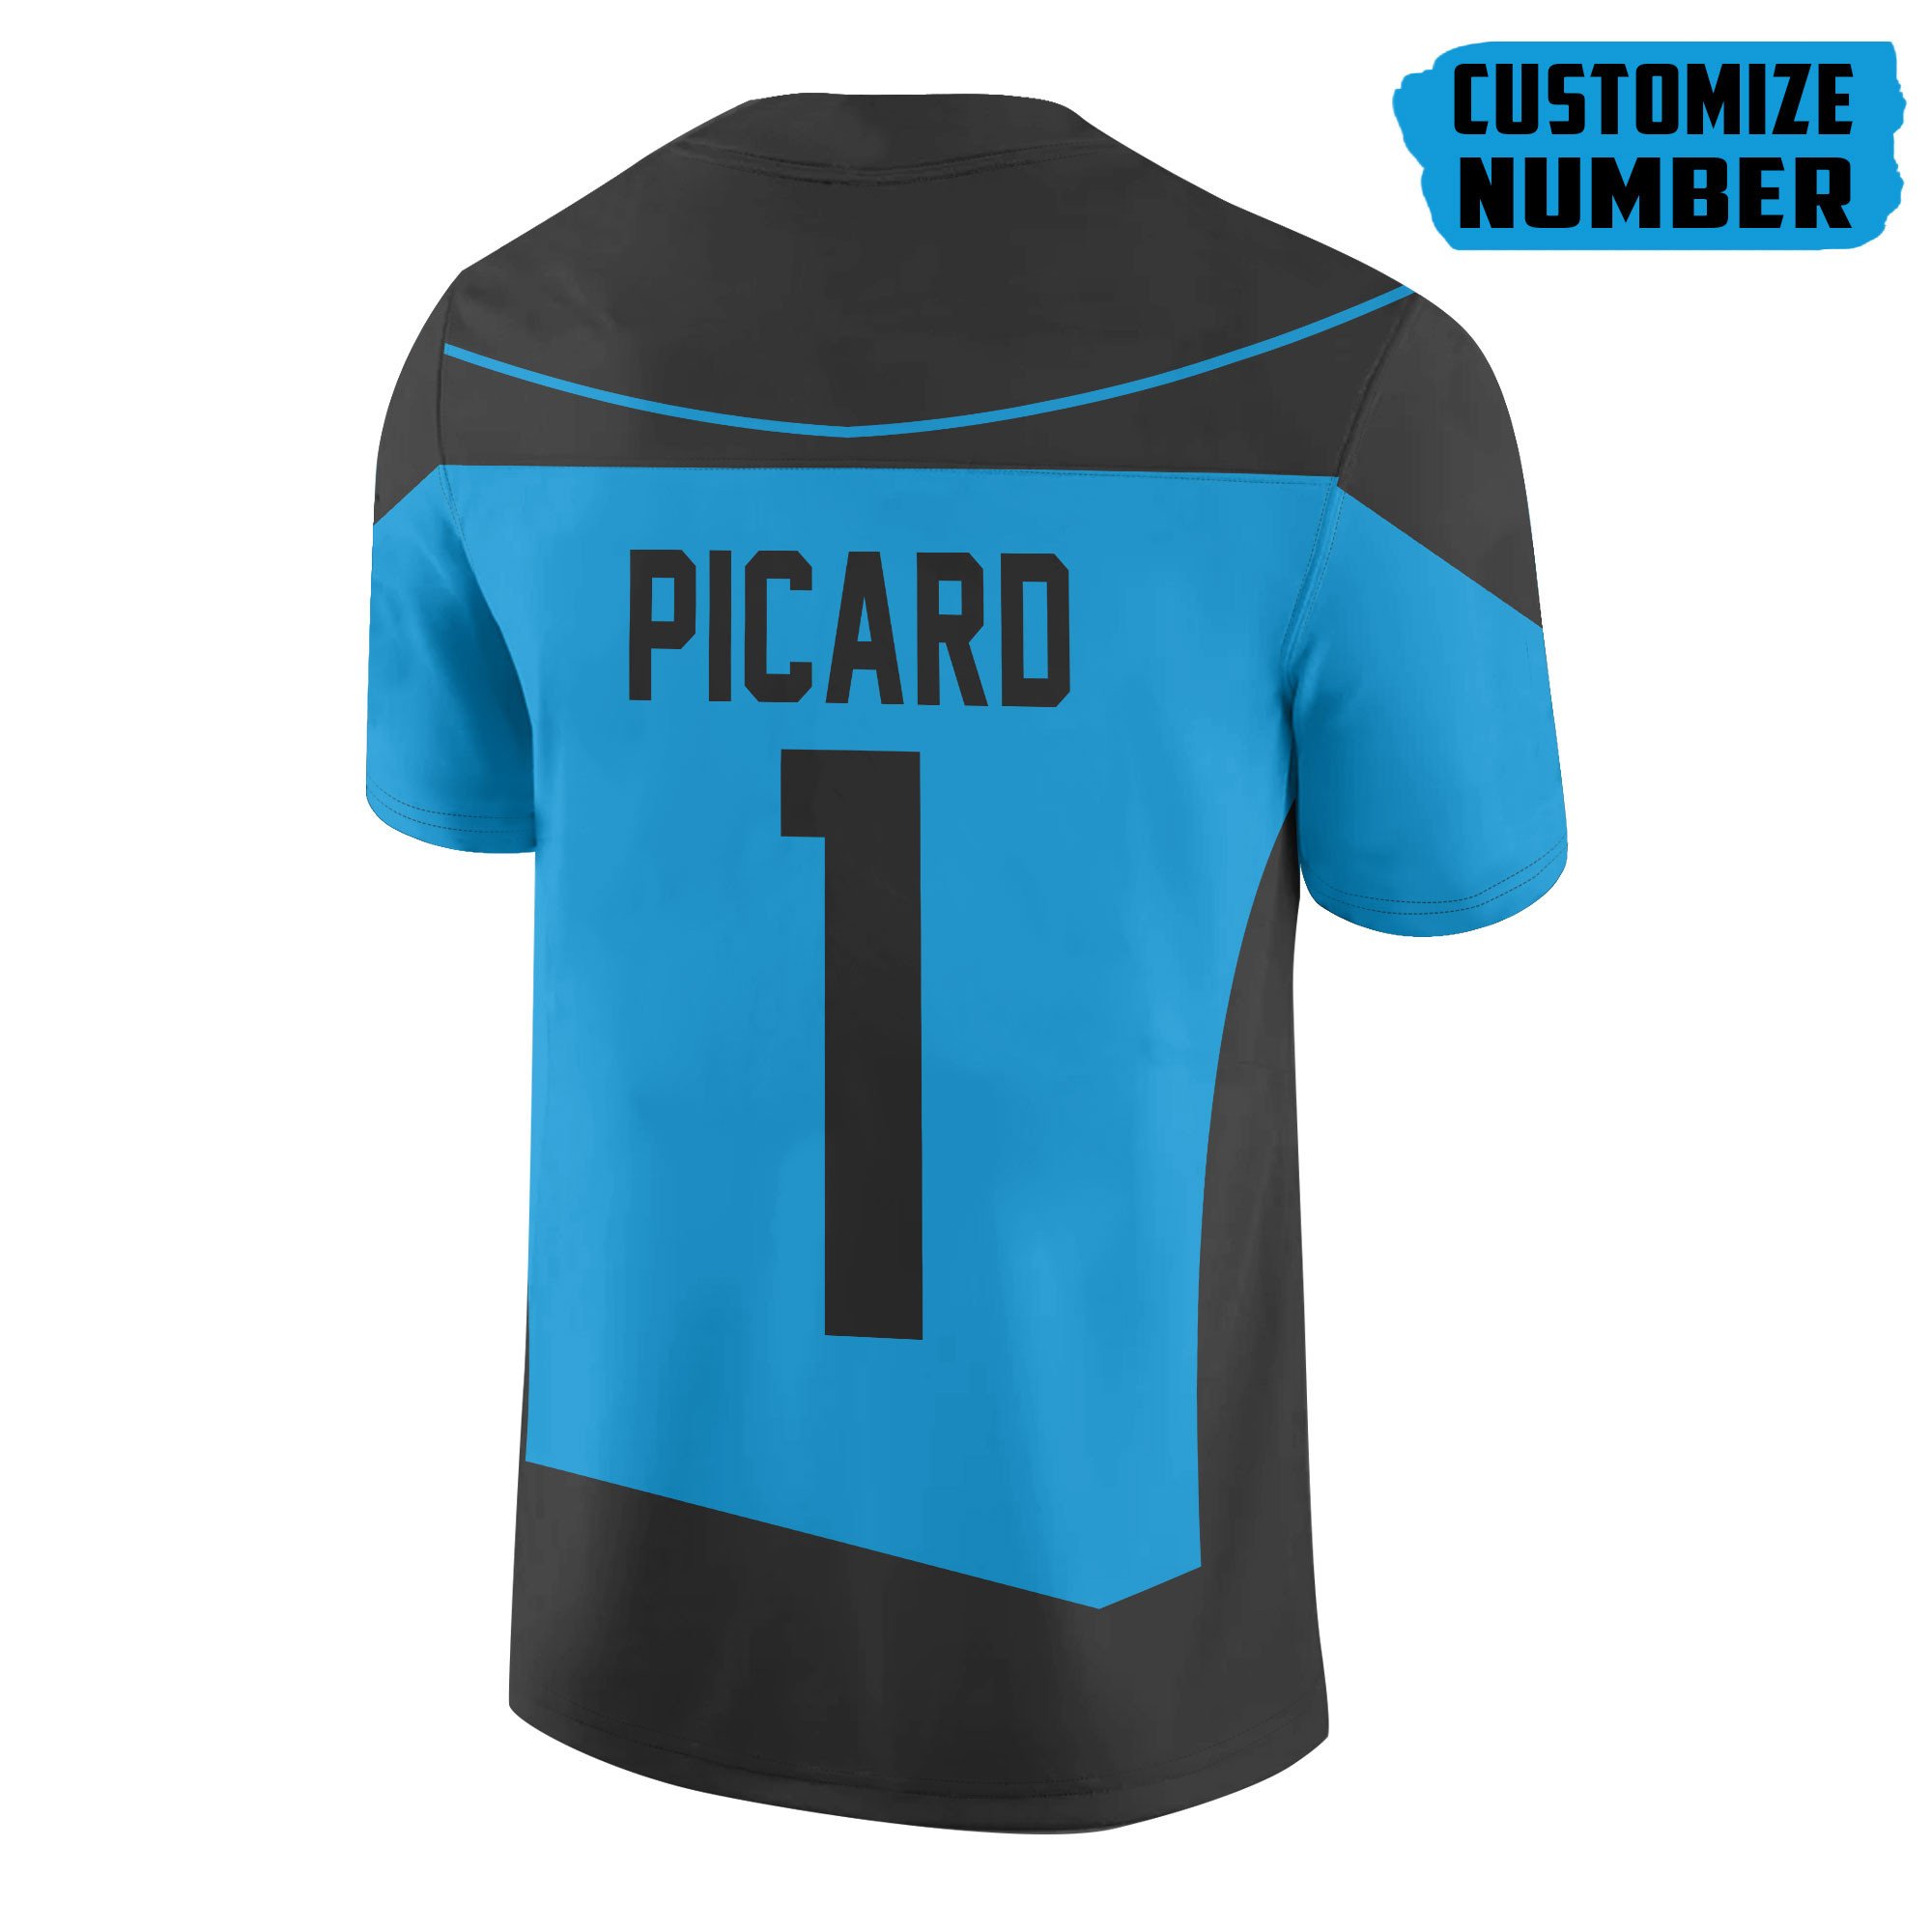 TOP S.T The Next Generation Blue Version Personalized Custom Football All Over Print Jersey 13